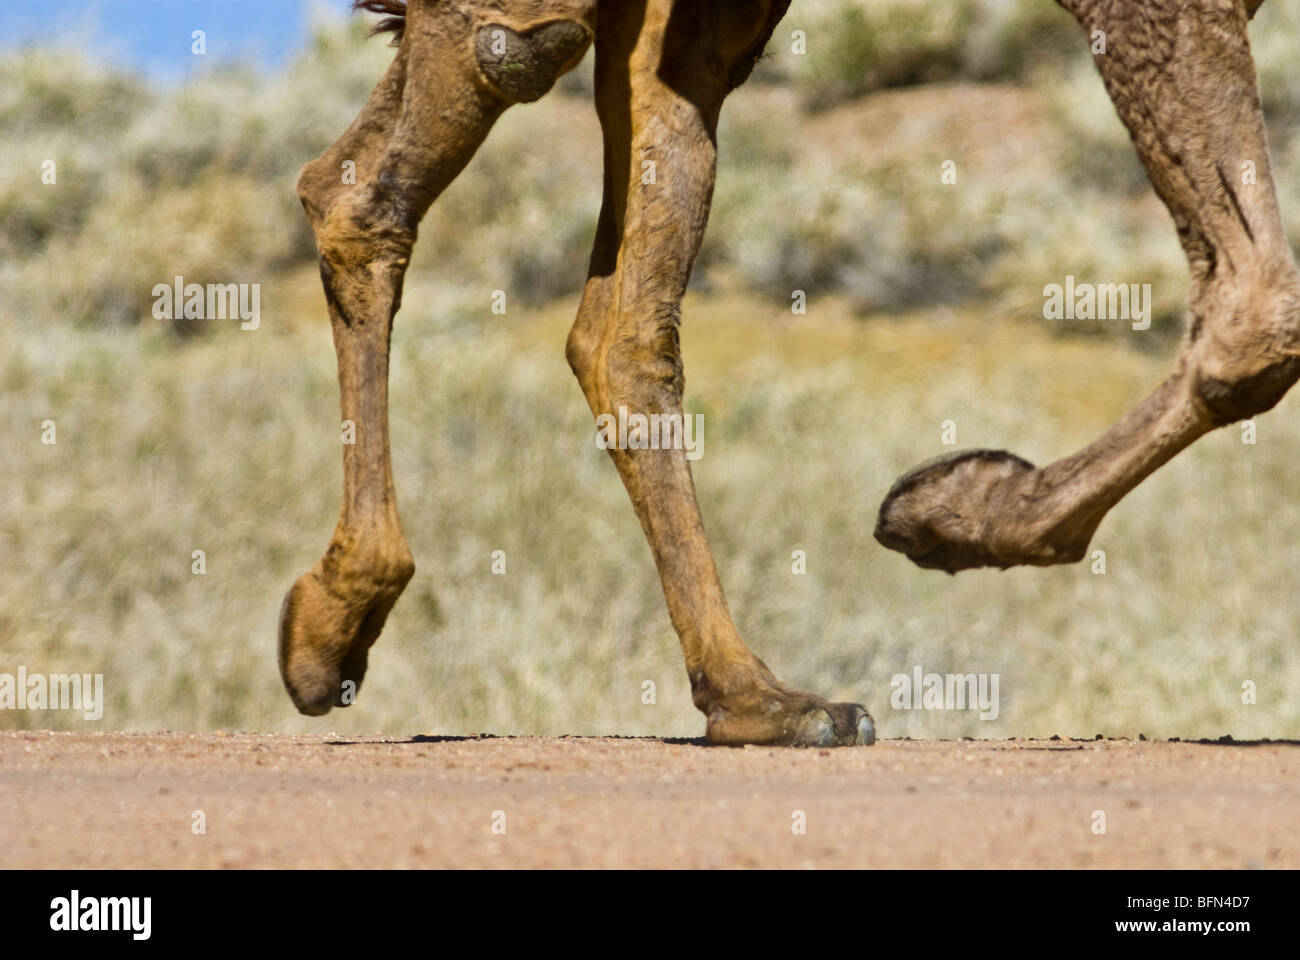 Detail of a Dromedary Camels hooves at full gallop along a dirt track. Stock Photo